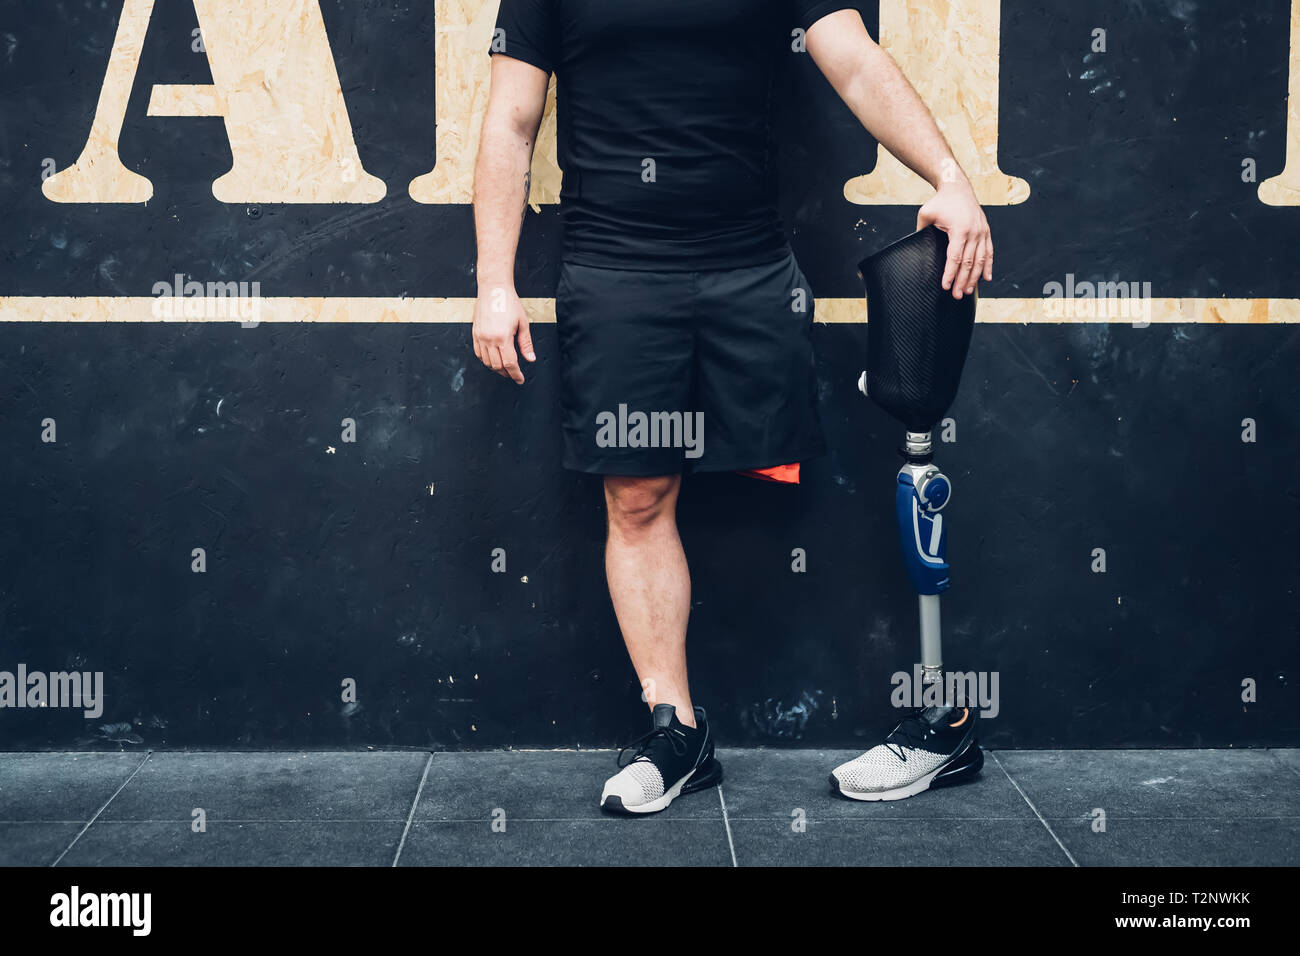 Man with prosthetic leg leaning on wall in gym Stock Photo